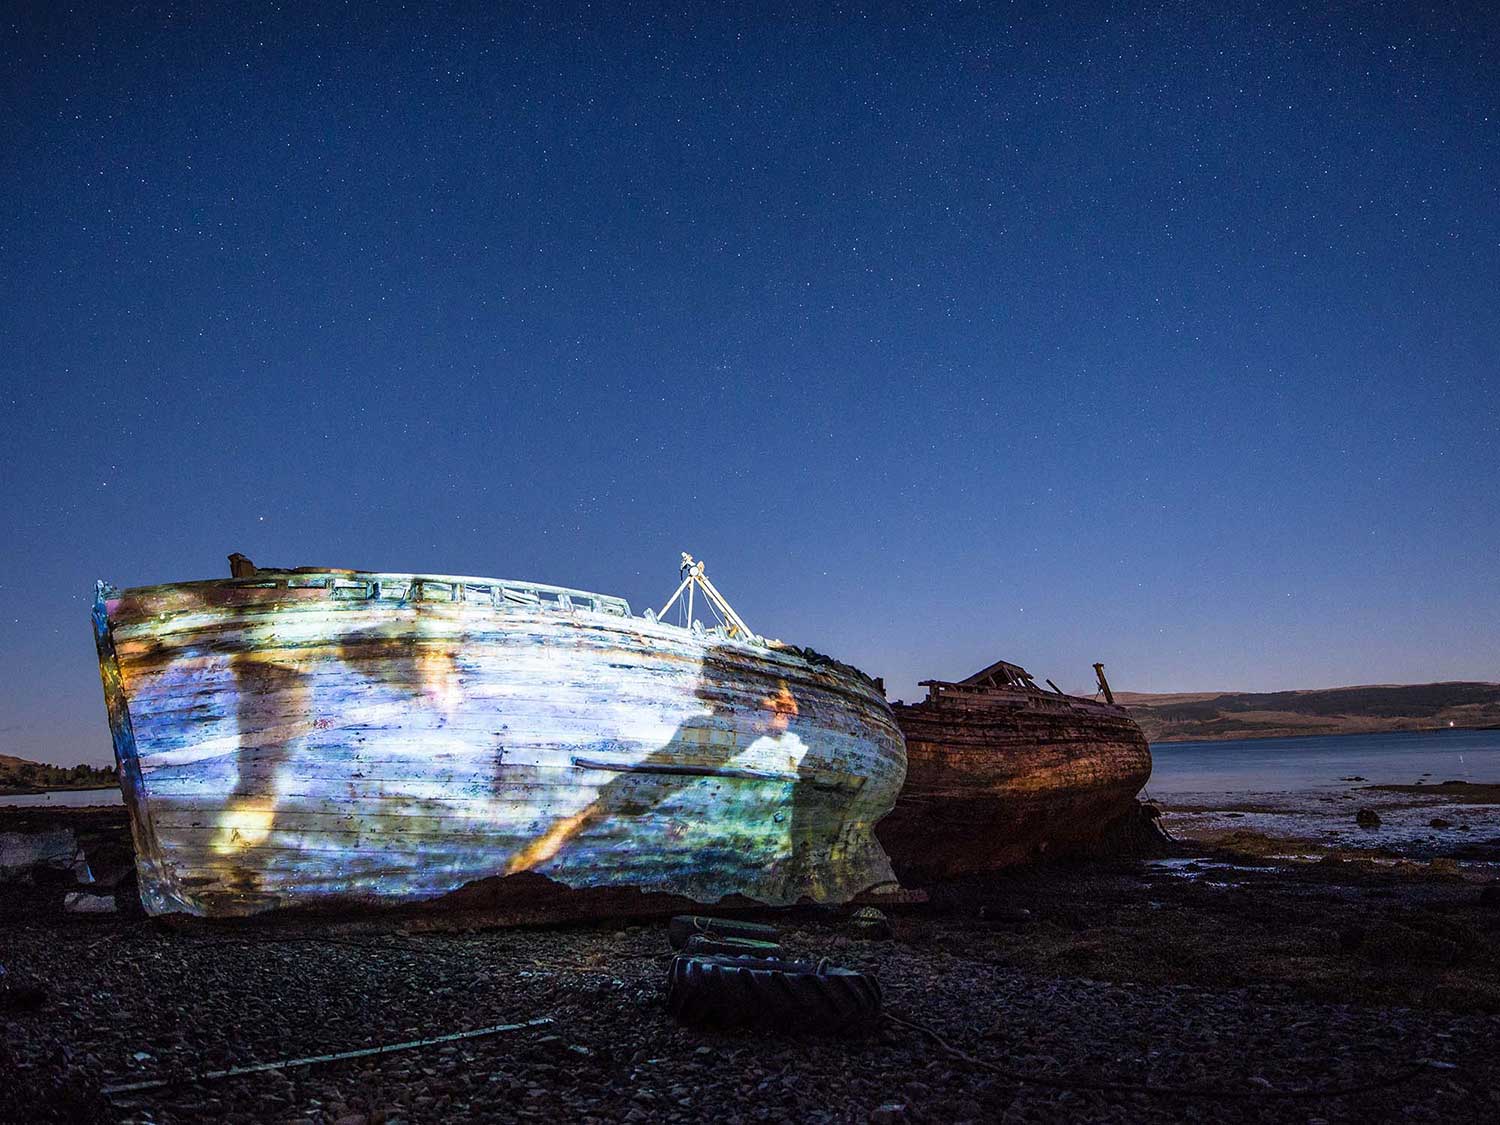 Calmac timelapse marketing film, Guerrilla Projections on abandoned boats, Mull